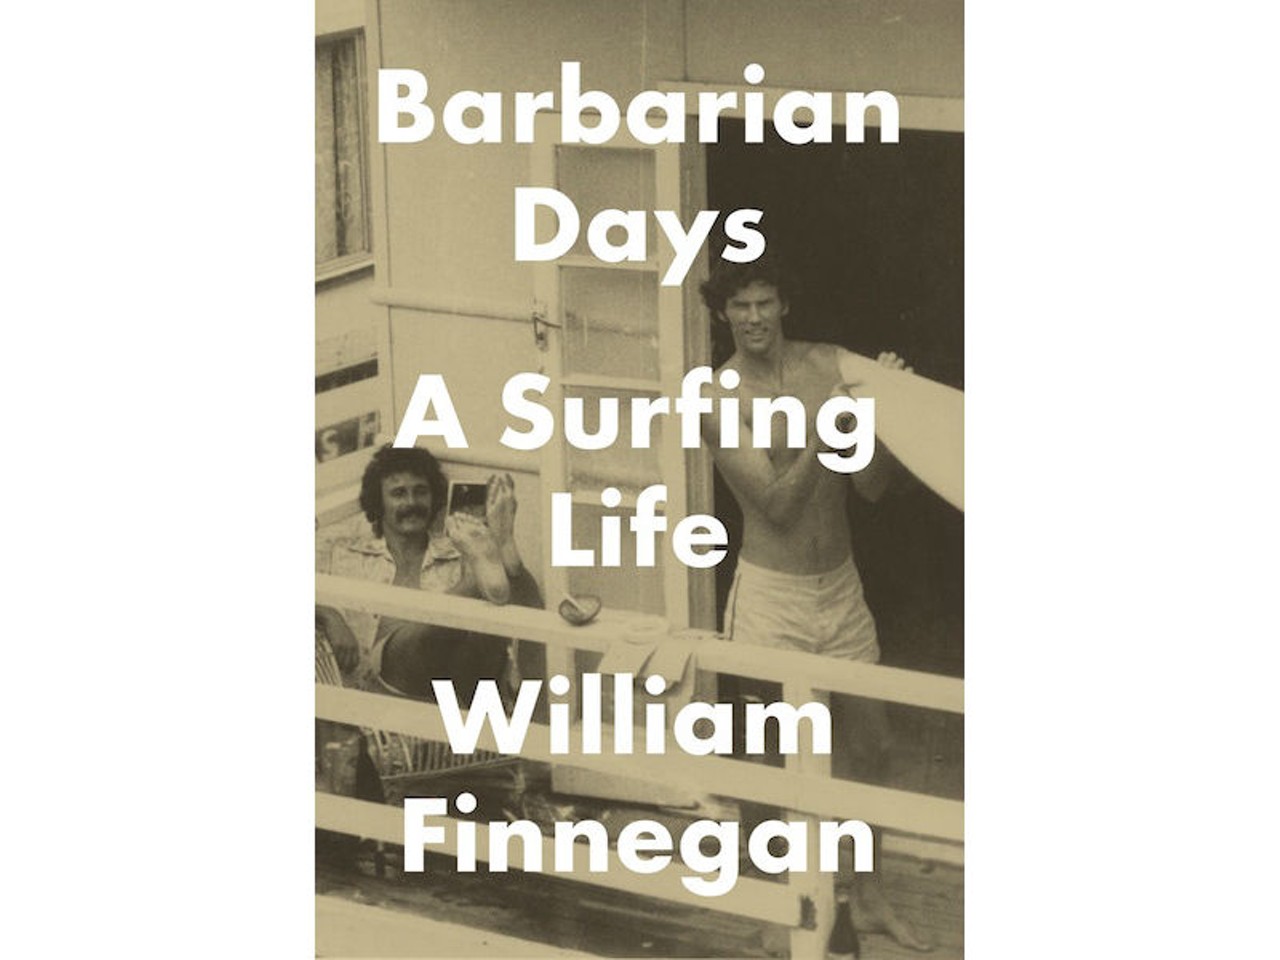 Barbarian Days: A Surfing Life, memoir by William Finnegan (Penguin Press, 464 pages)
The veteran war reporter's surfing memoir is a dreamy evocation of life on the beach and in the waves, but by "dreamy," I don't mean "hazy"; I mean that preternaturally clear-eyed total recall of physical detail that seems only to exist in dreams. That Finnegan managed to remember so much about the coasts and tides and coral and salt of his childhood is remarkable, and perhaps that fierce attention is what kept him alive through assignments in Bosnia, Nicaragua and the Sudan. &#151;JBY